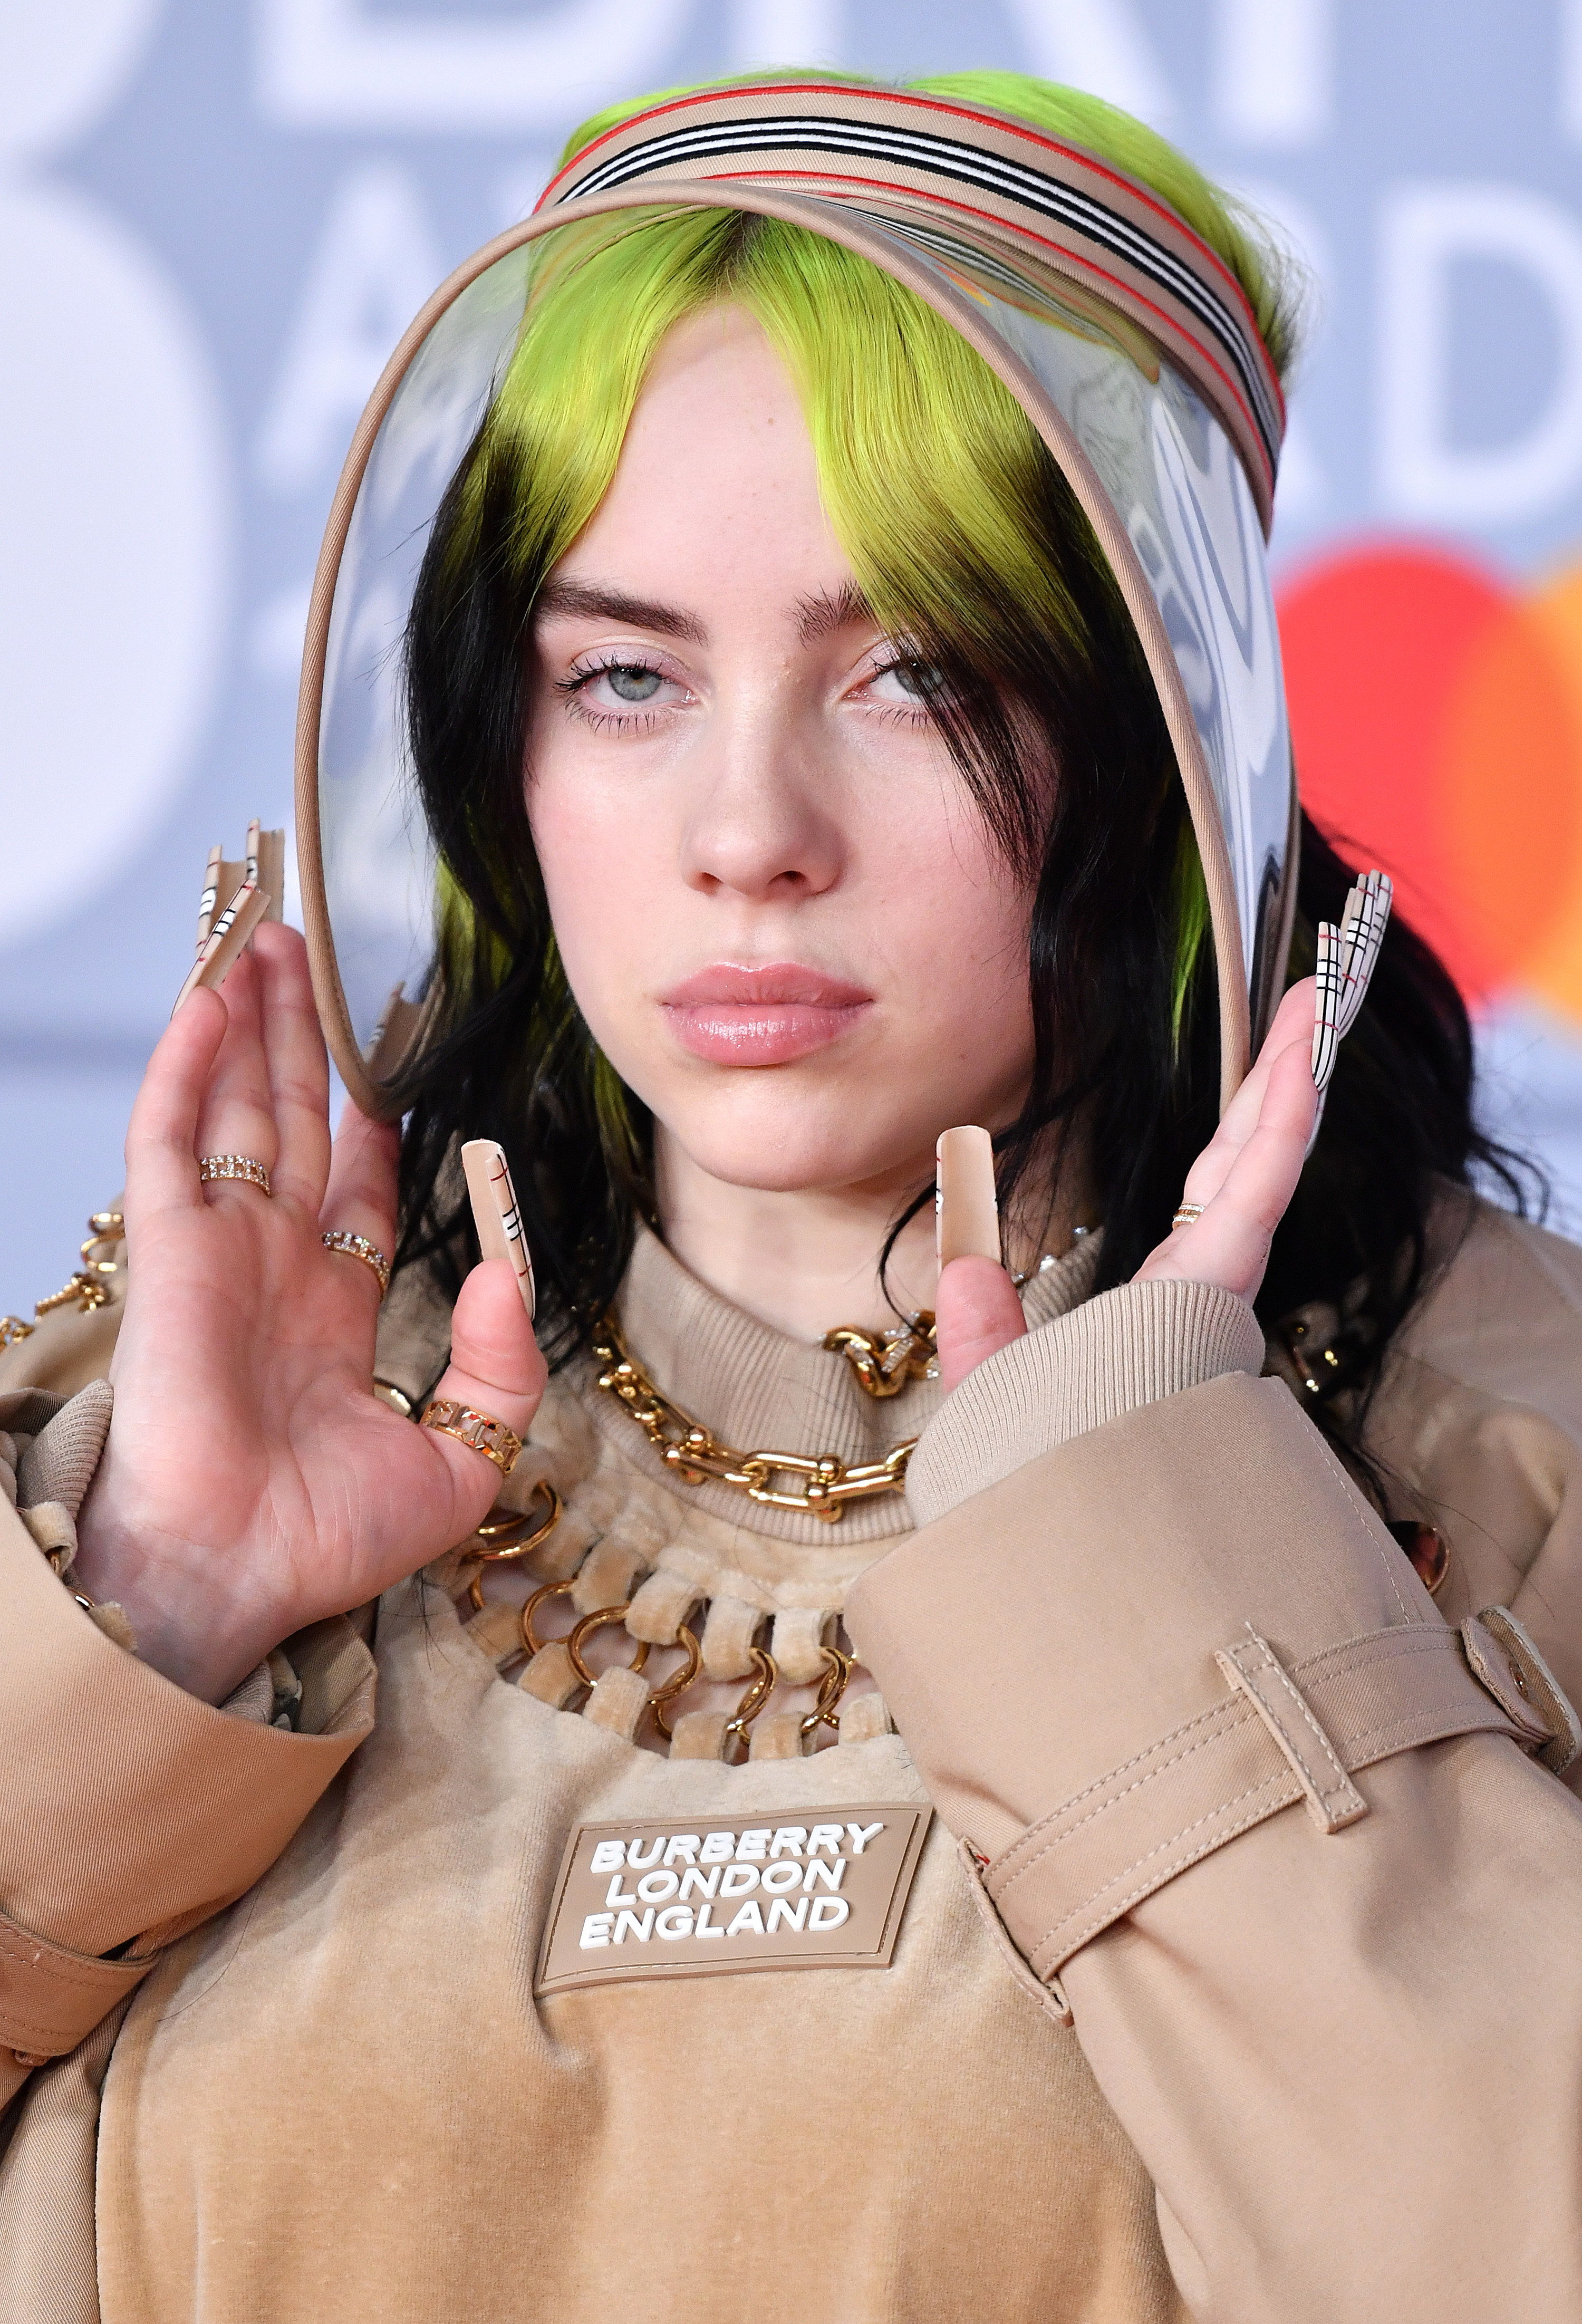 Billie posing on the red carpet for the 2020 Brit Awards